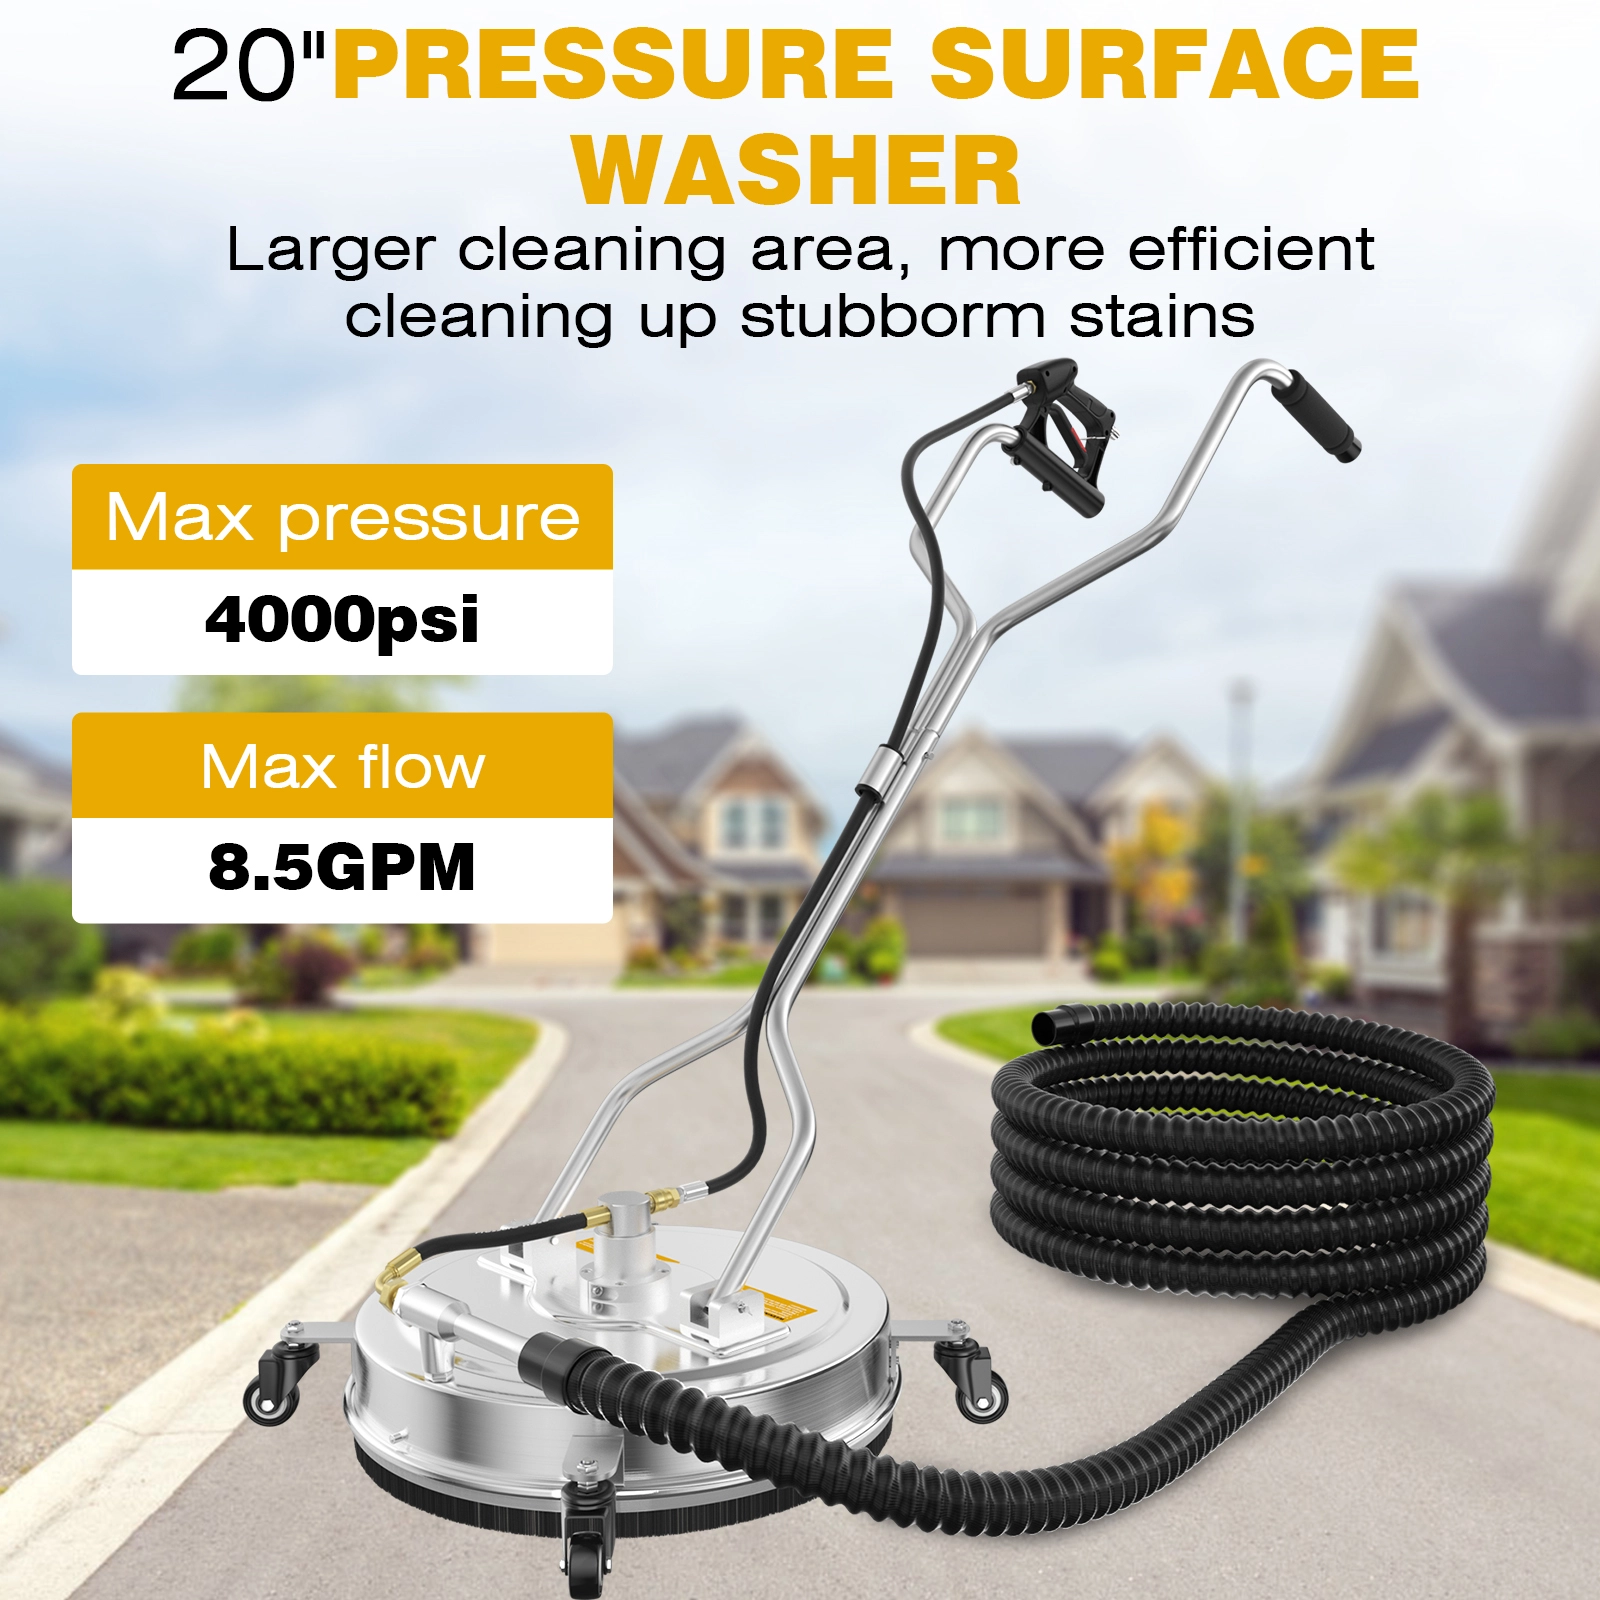 EVEAGE Environmental Guardian 20 inch Sewage Recovery Surface Cleaner Pressure Washer Dual Handle